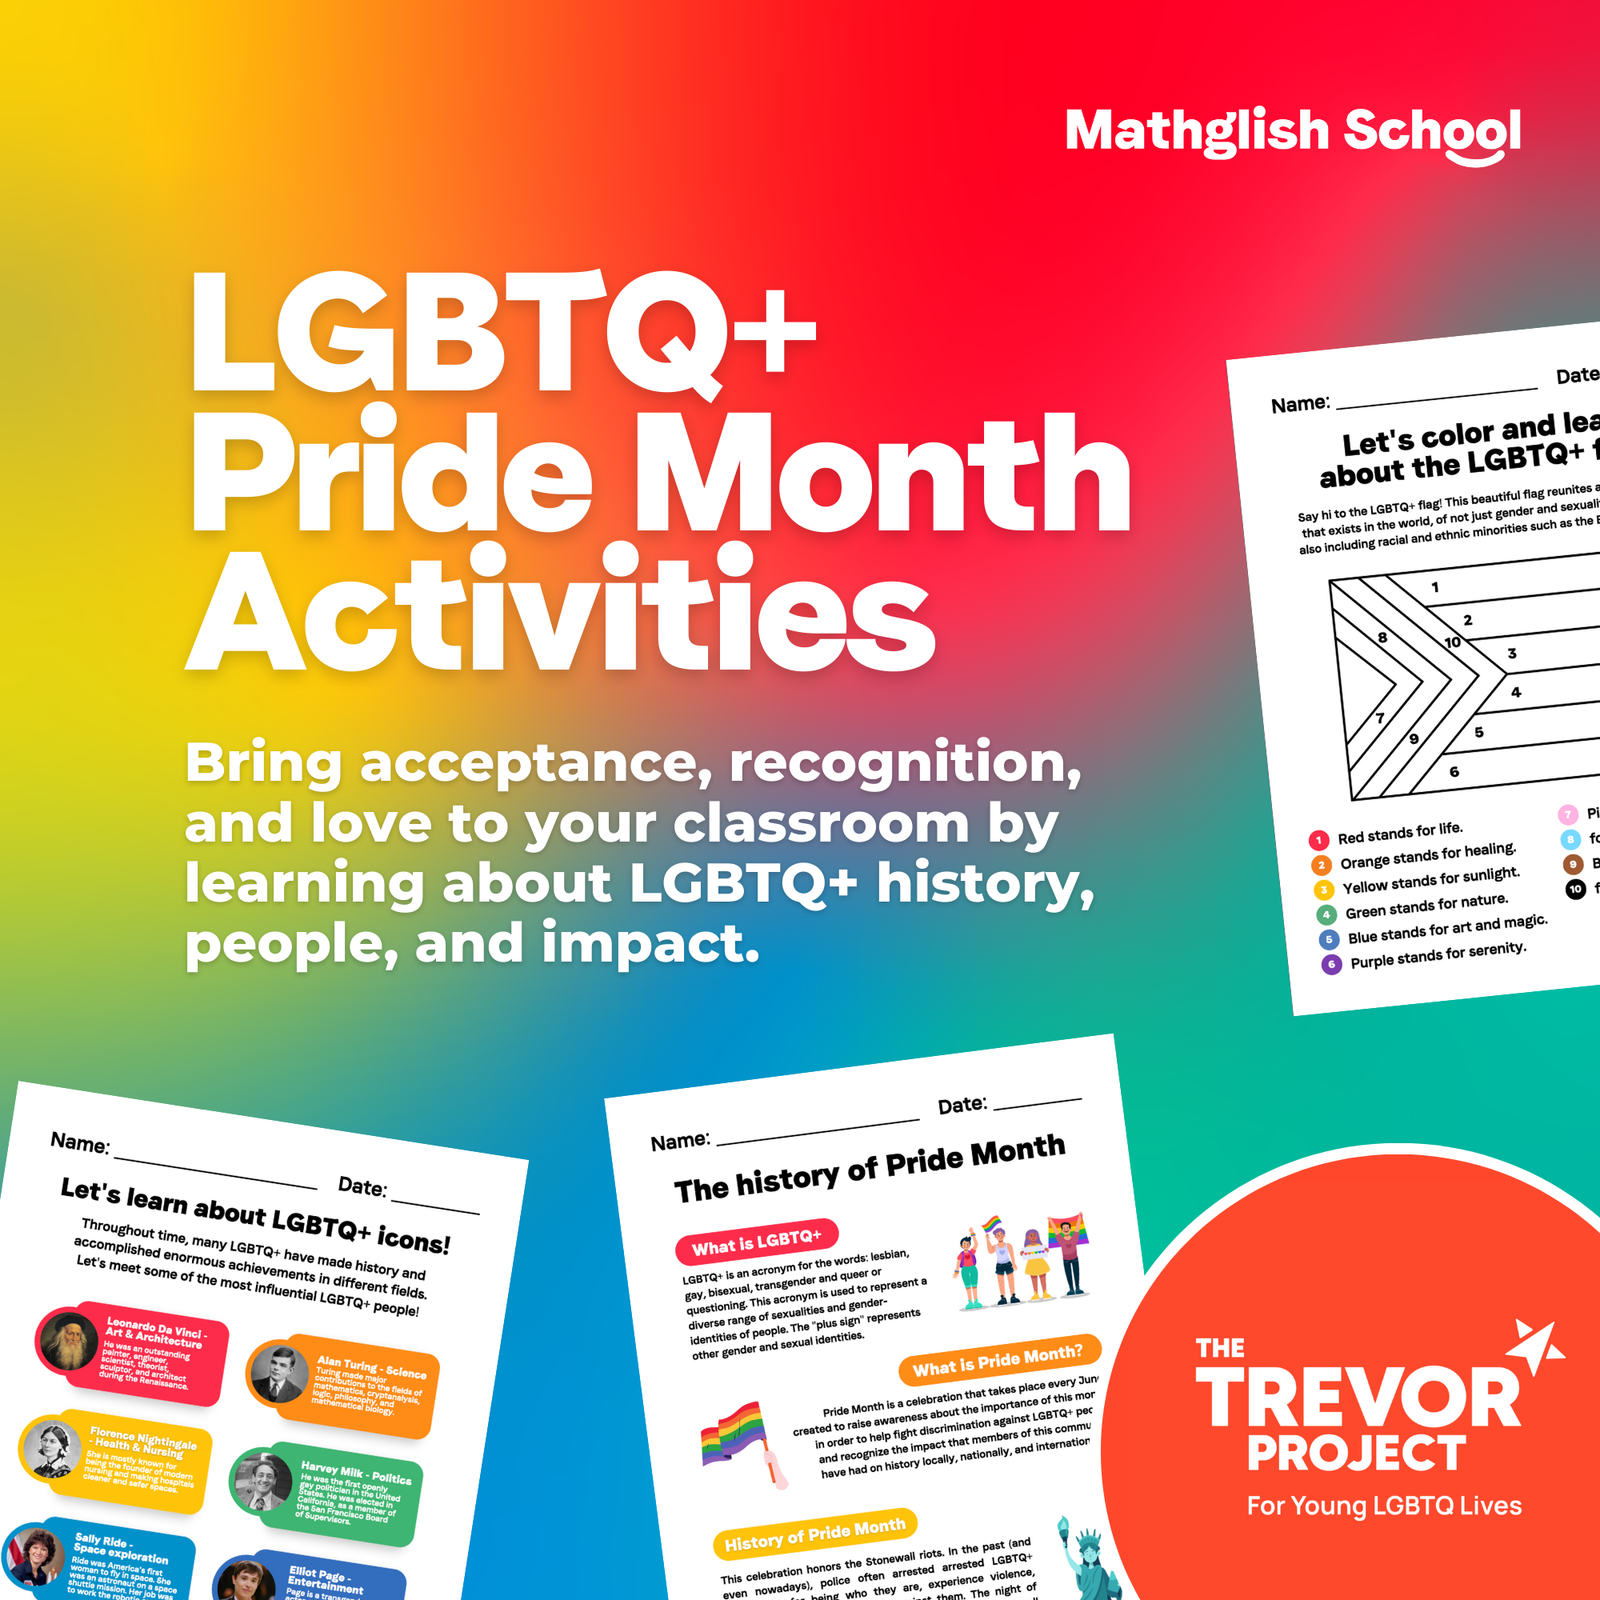 Celebrate Pride Month with these LGBTQ+ history & impact activities